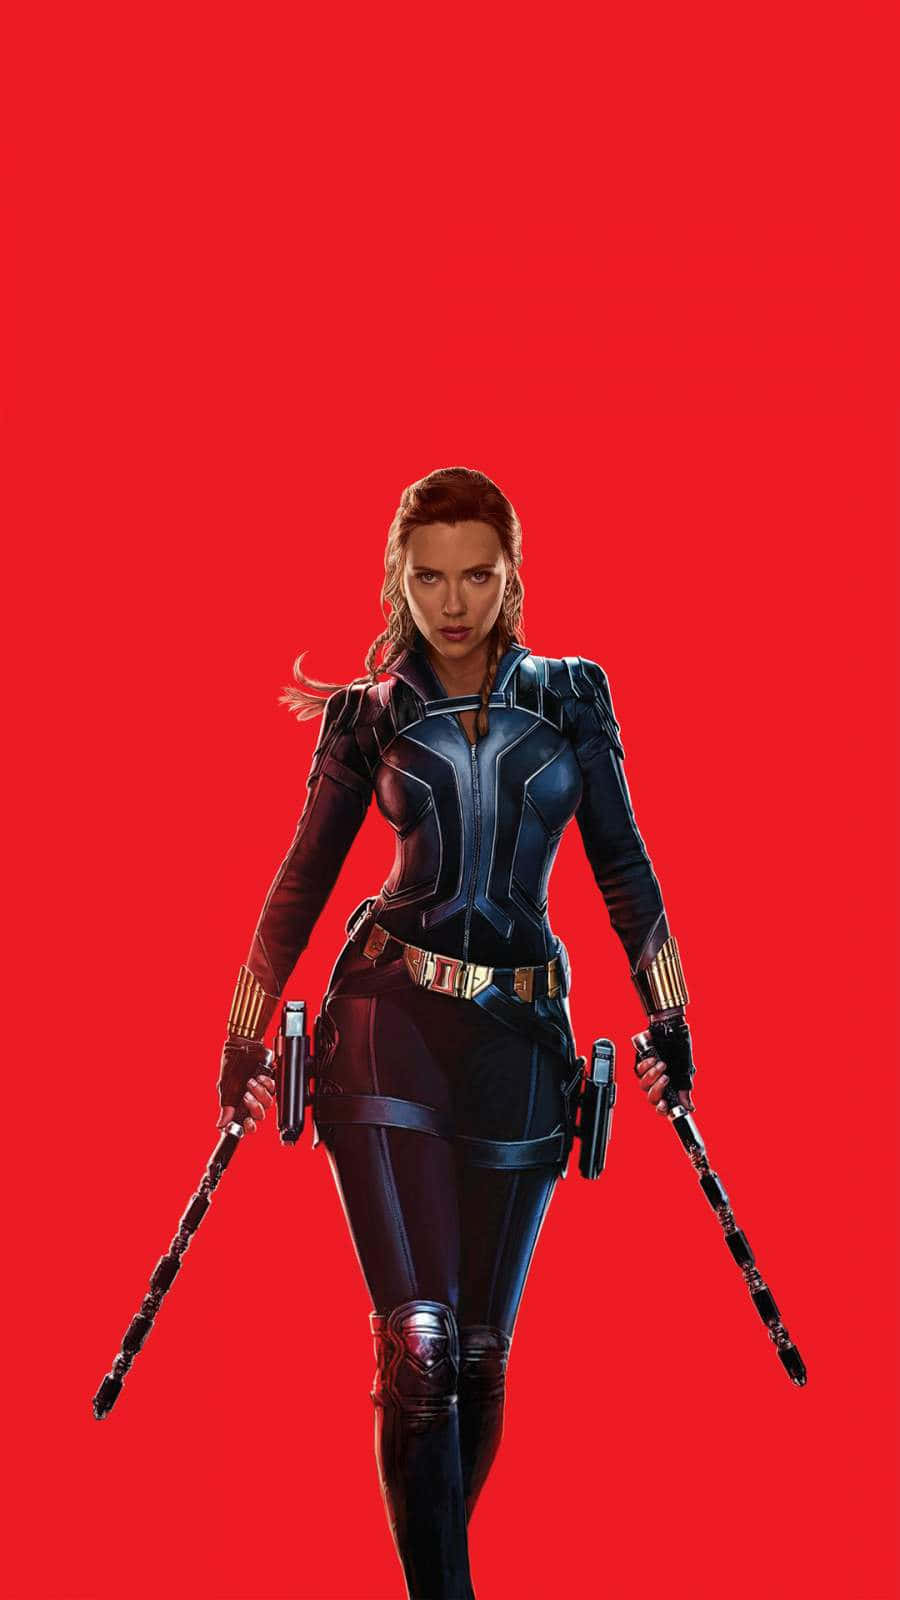 The Avengers unite with the Black Widow iPhone 7 Wallpaper